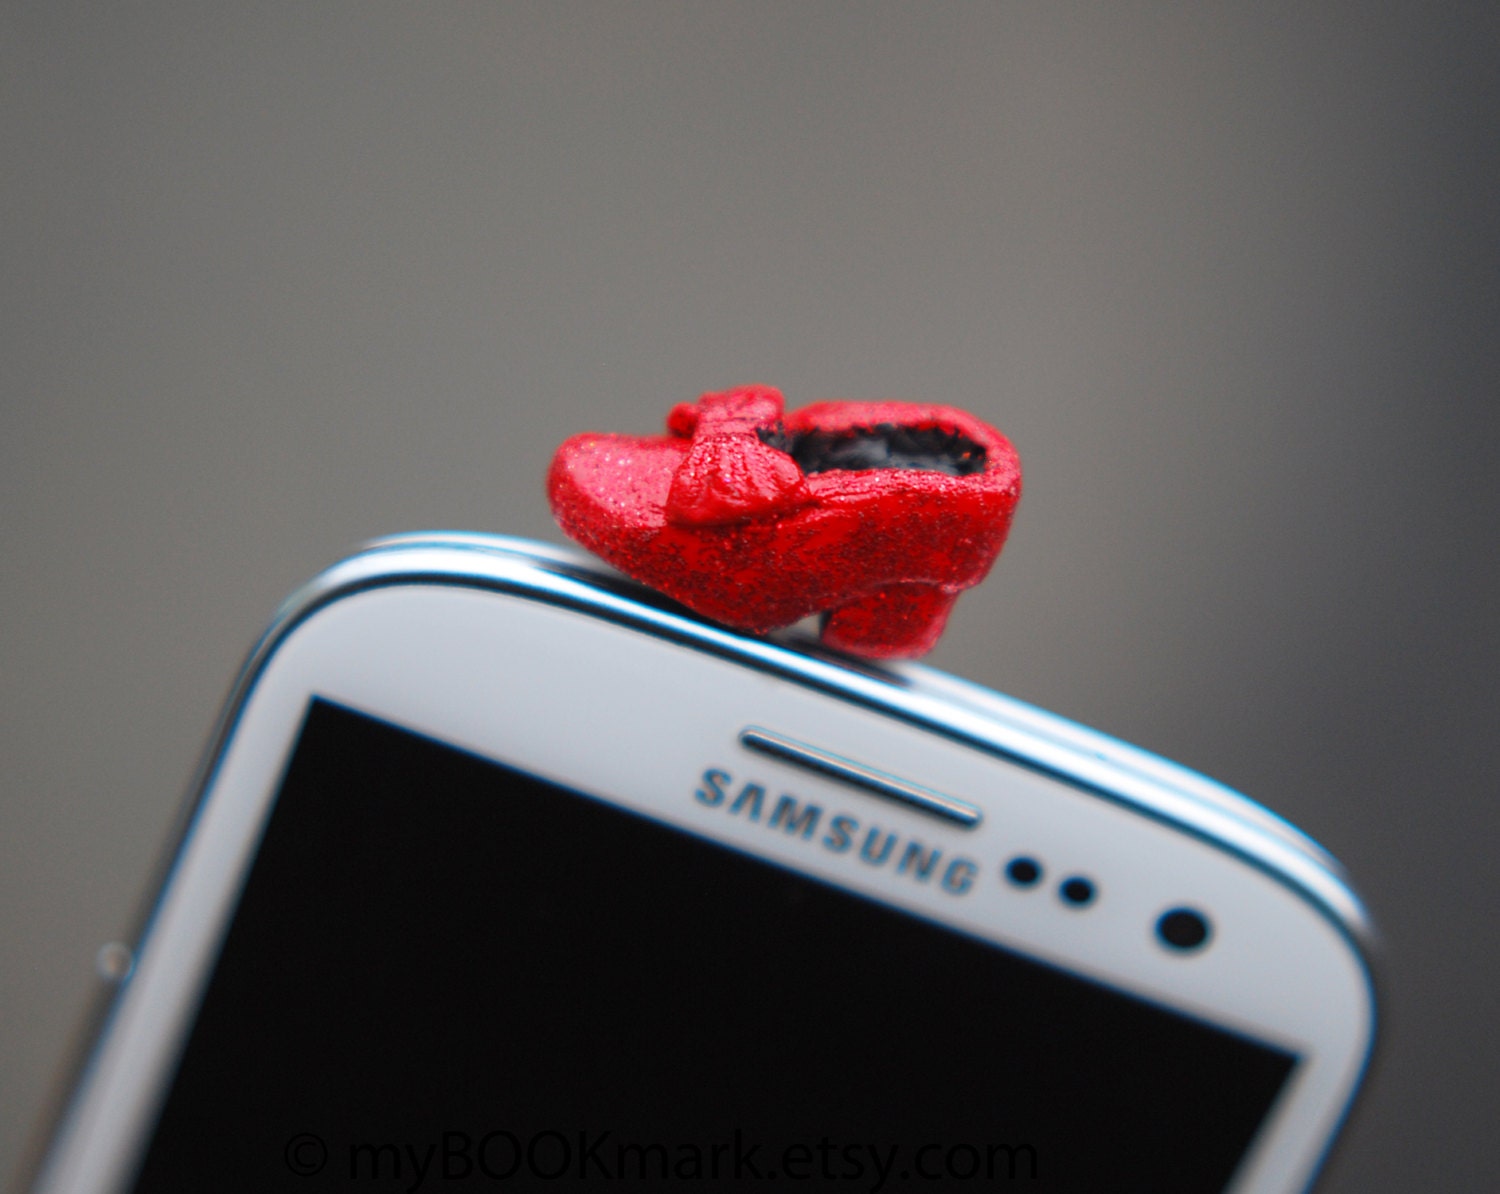 Dorothy shoe cell phone accessory. Ruby red slipper dustplug. Miniature Fits iPhone 5 4 4s ,iPad ,Samsung s2 s3, 3.5mm - MyBookmark